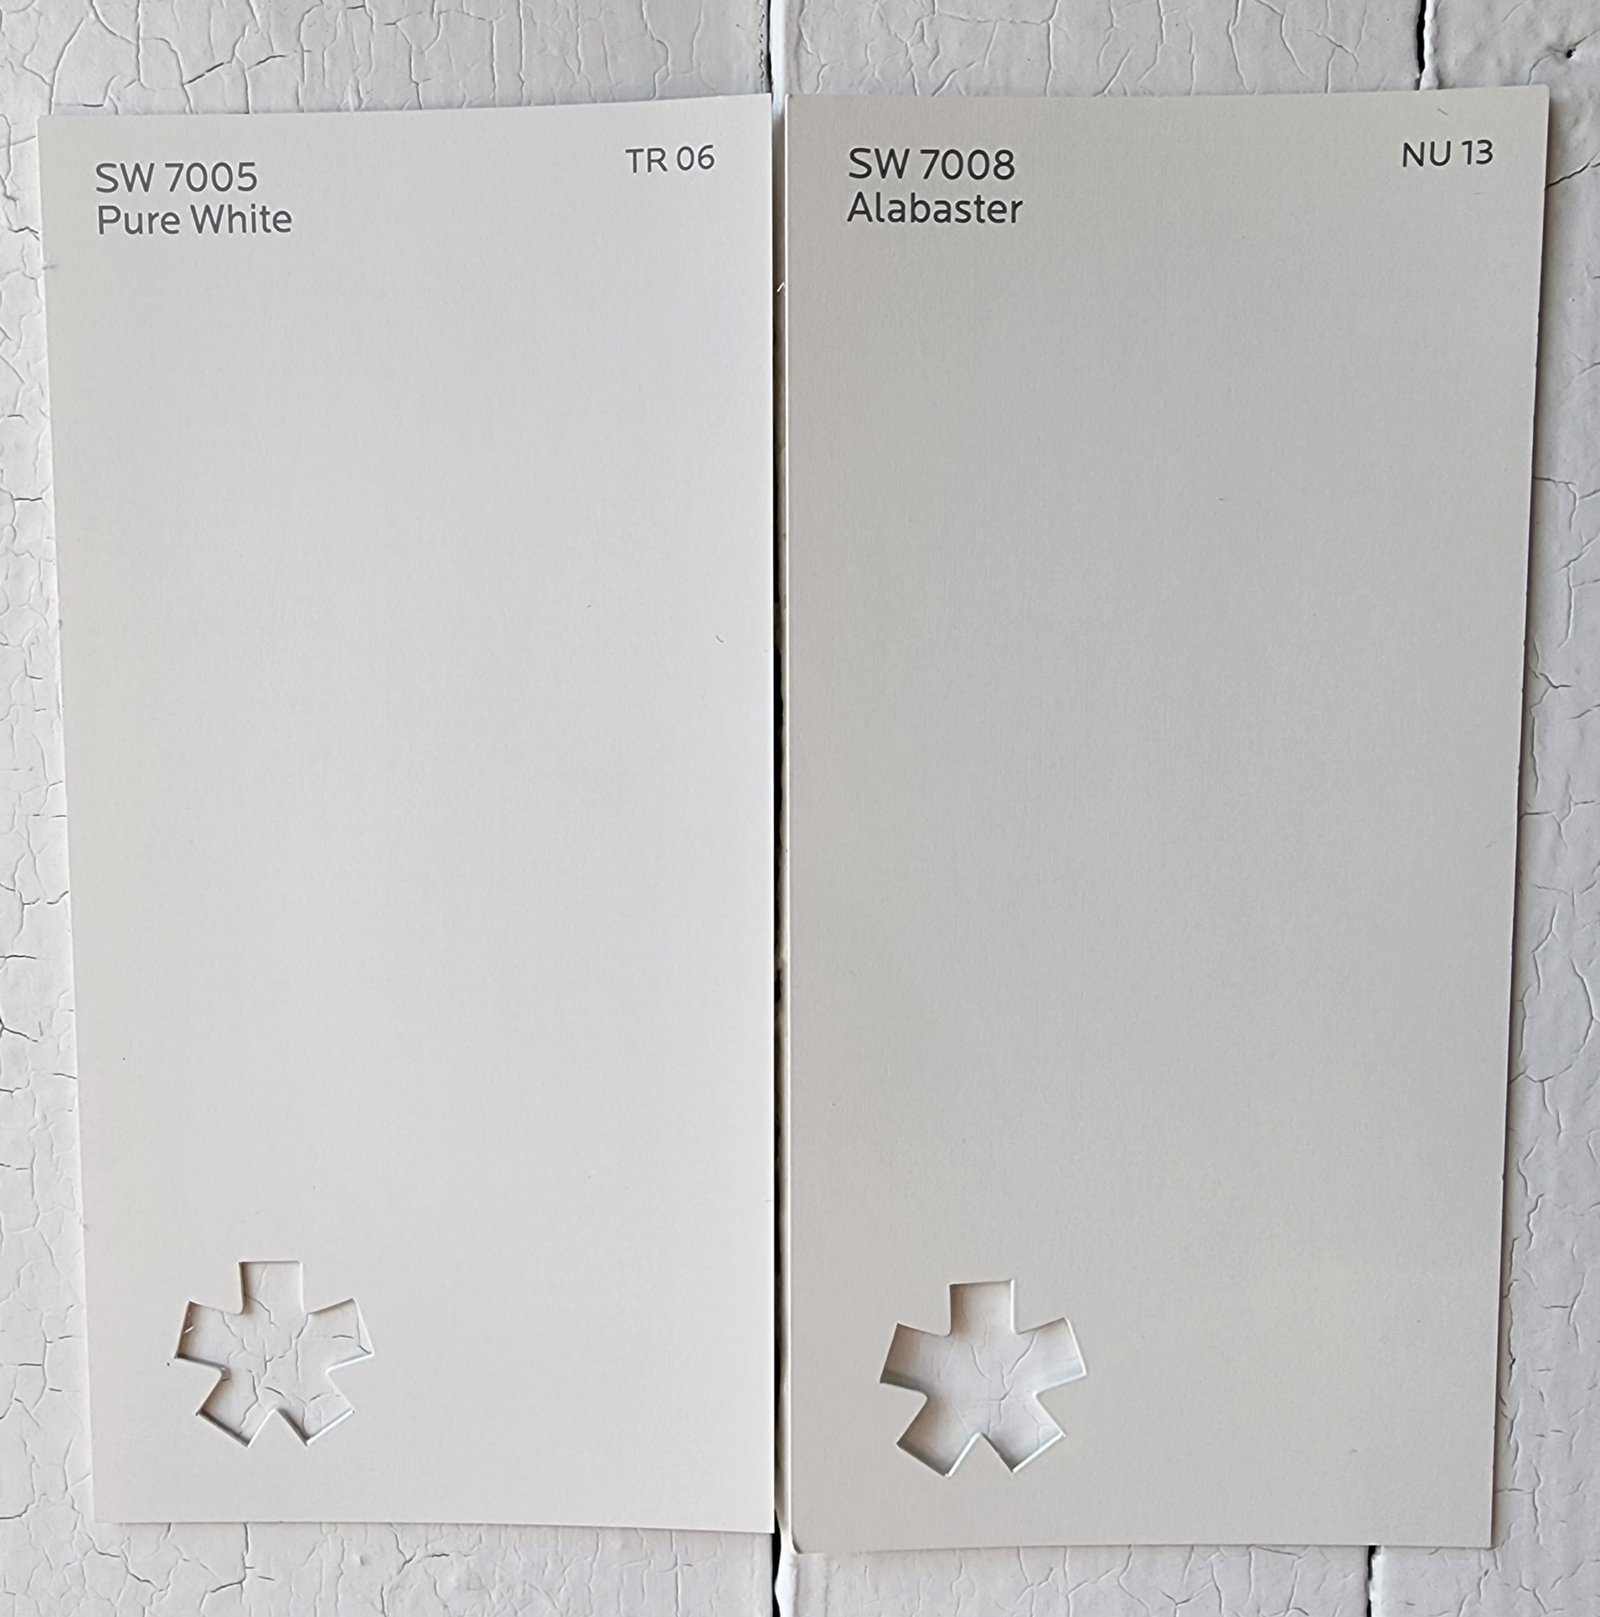  Pure White vs Alabaster by Sherwin Williams scaled